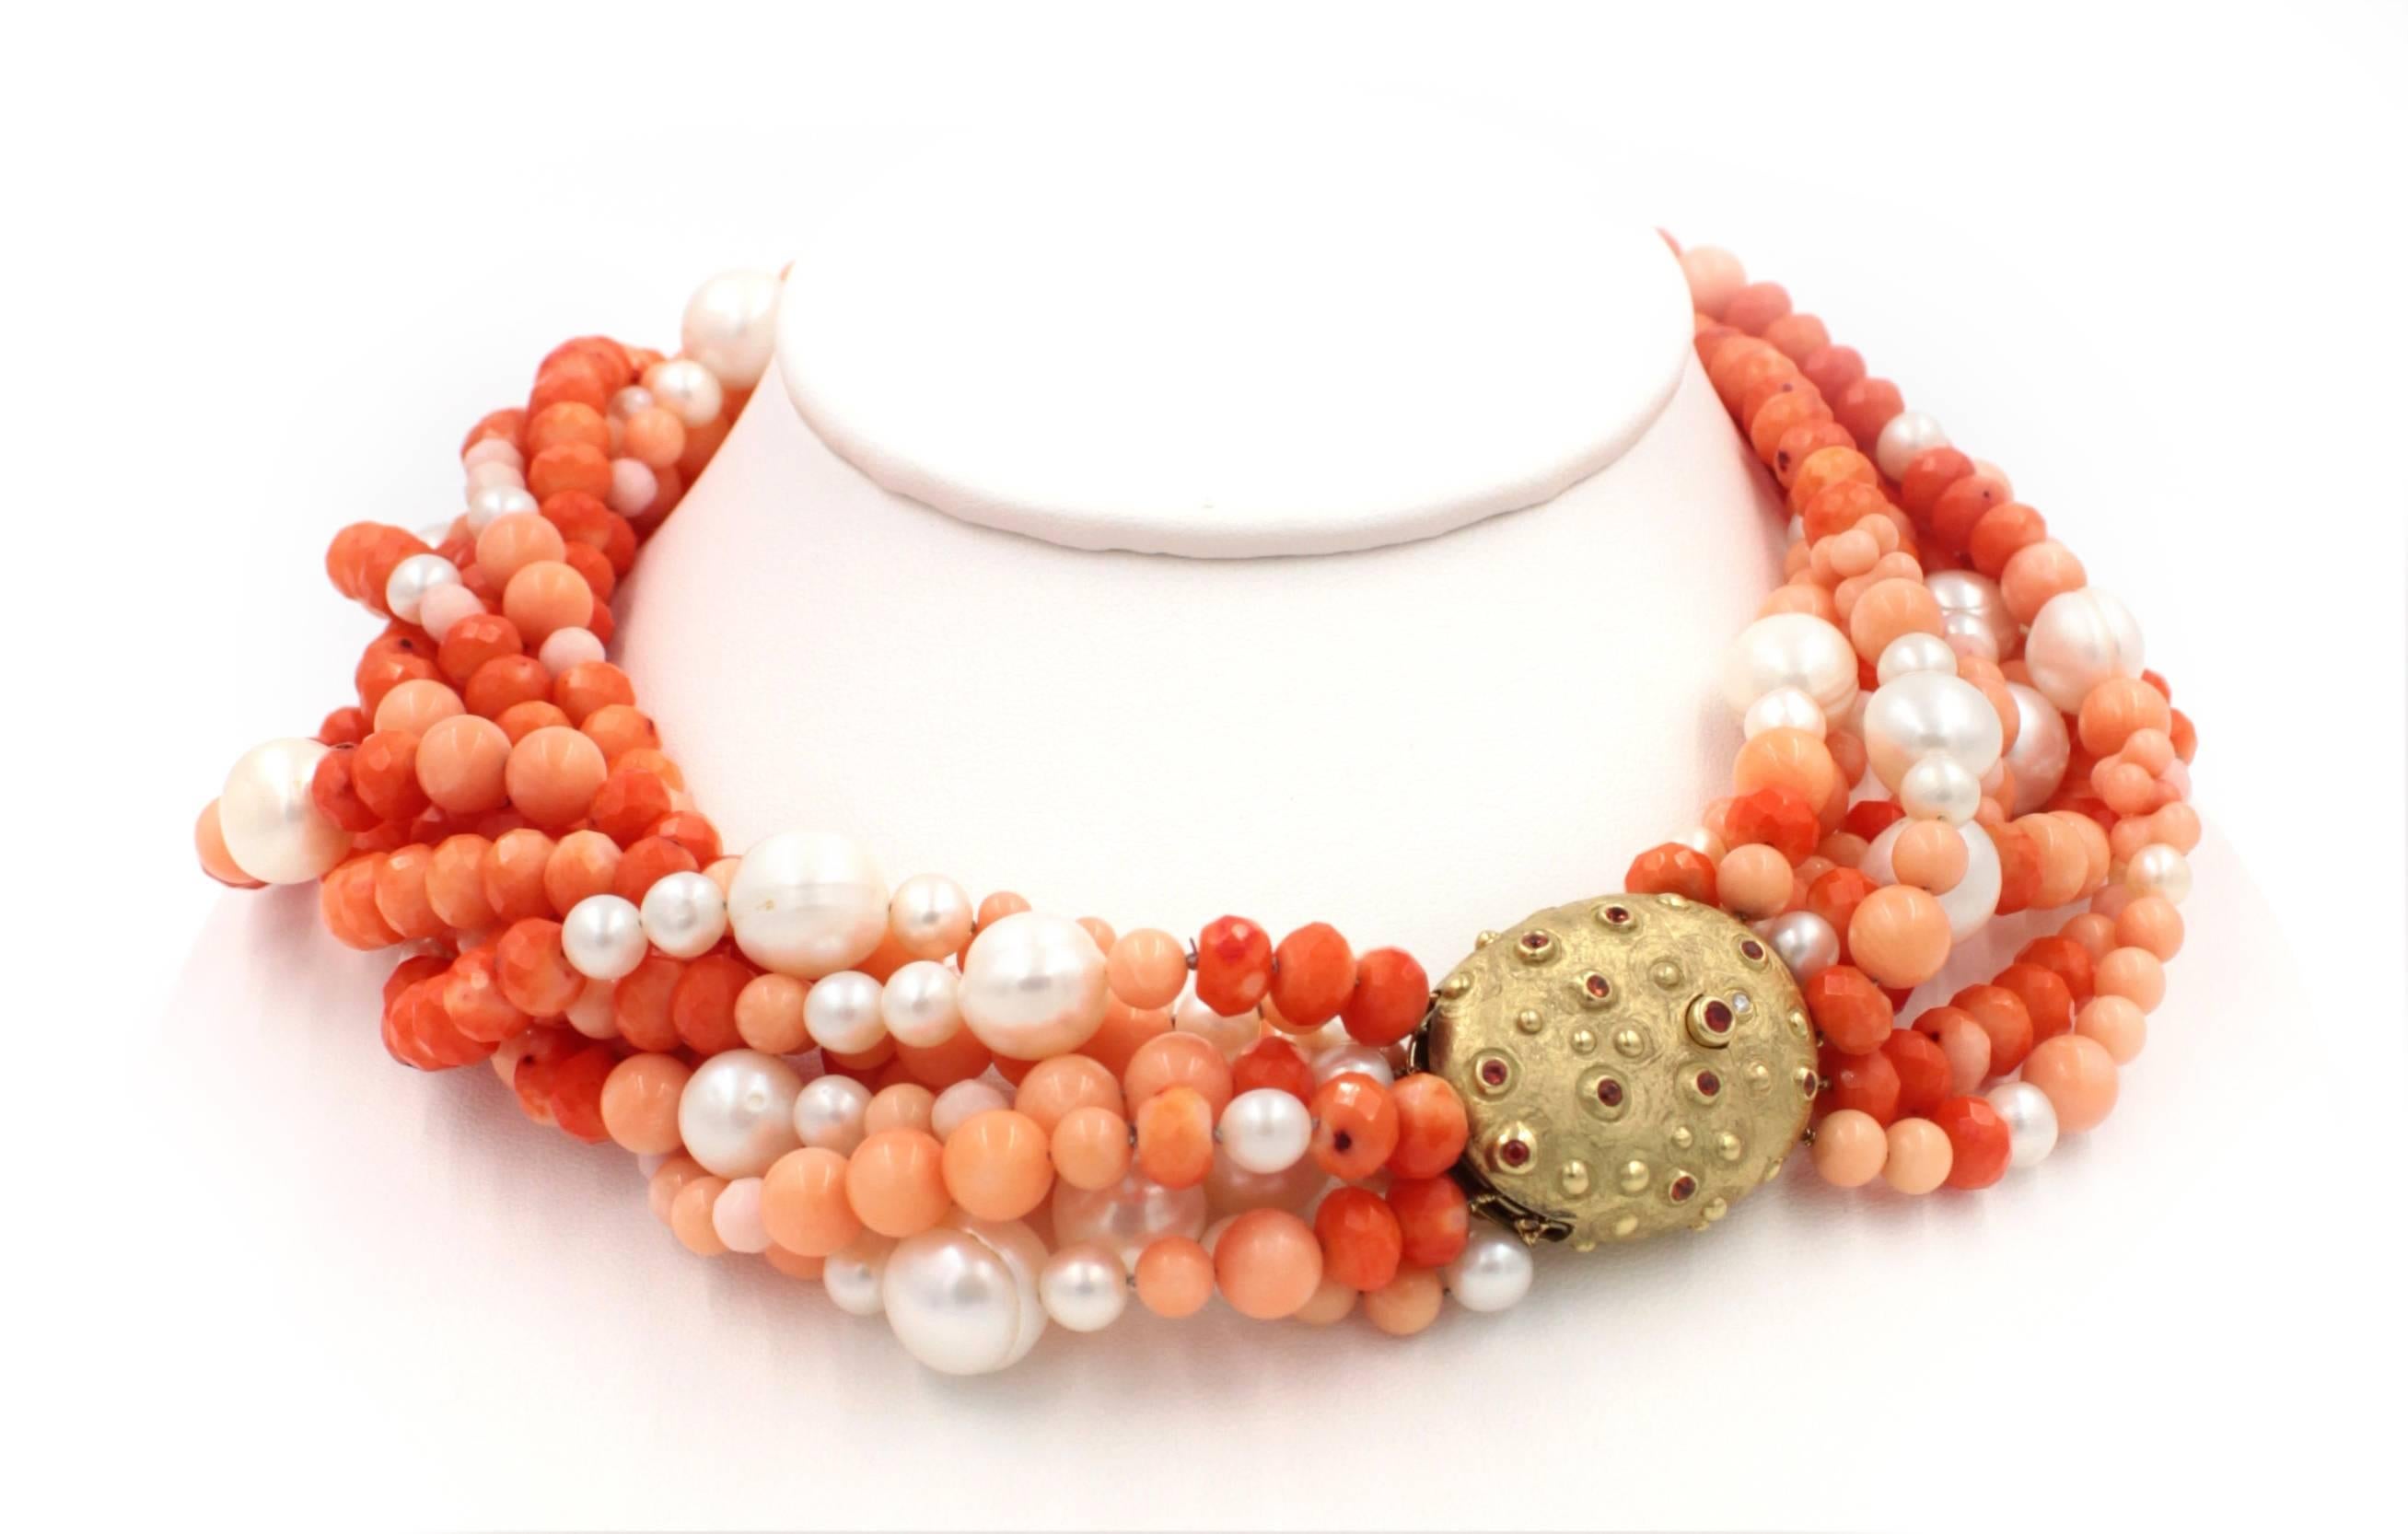 This 8 strand pearl and coral necklace is set with a wonderfully hand crafted 18k gold clasp set with 1.72ct orange sapphires. This clasp is so beautiful it is often worn as a center piece or just to the side of center. 